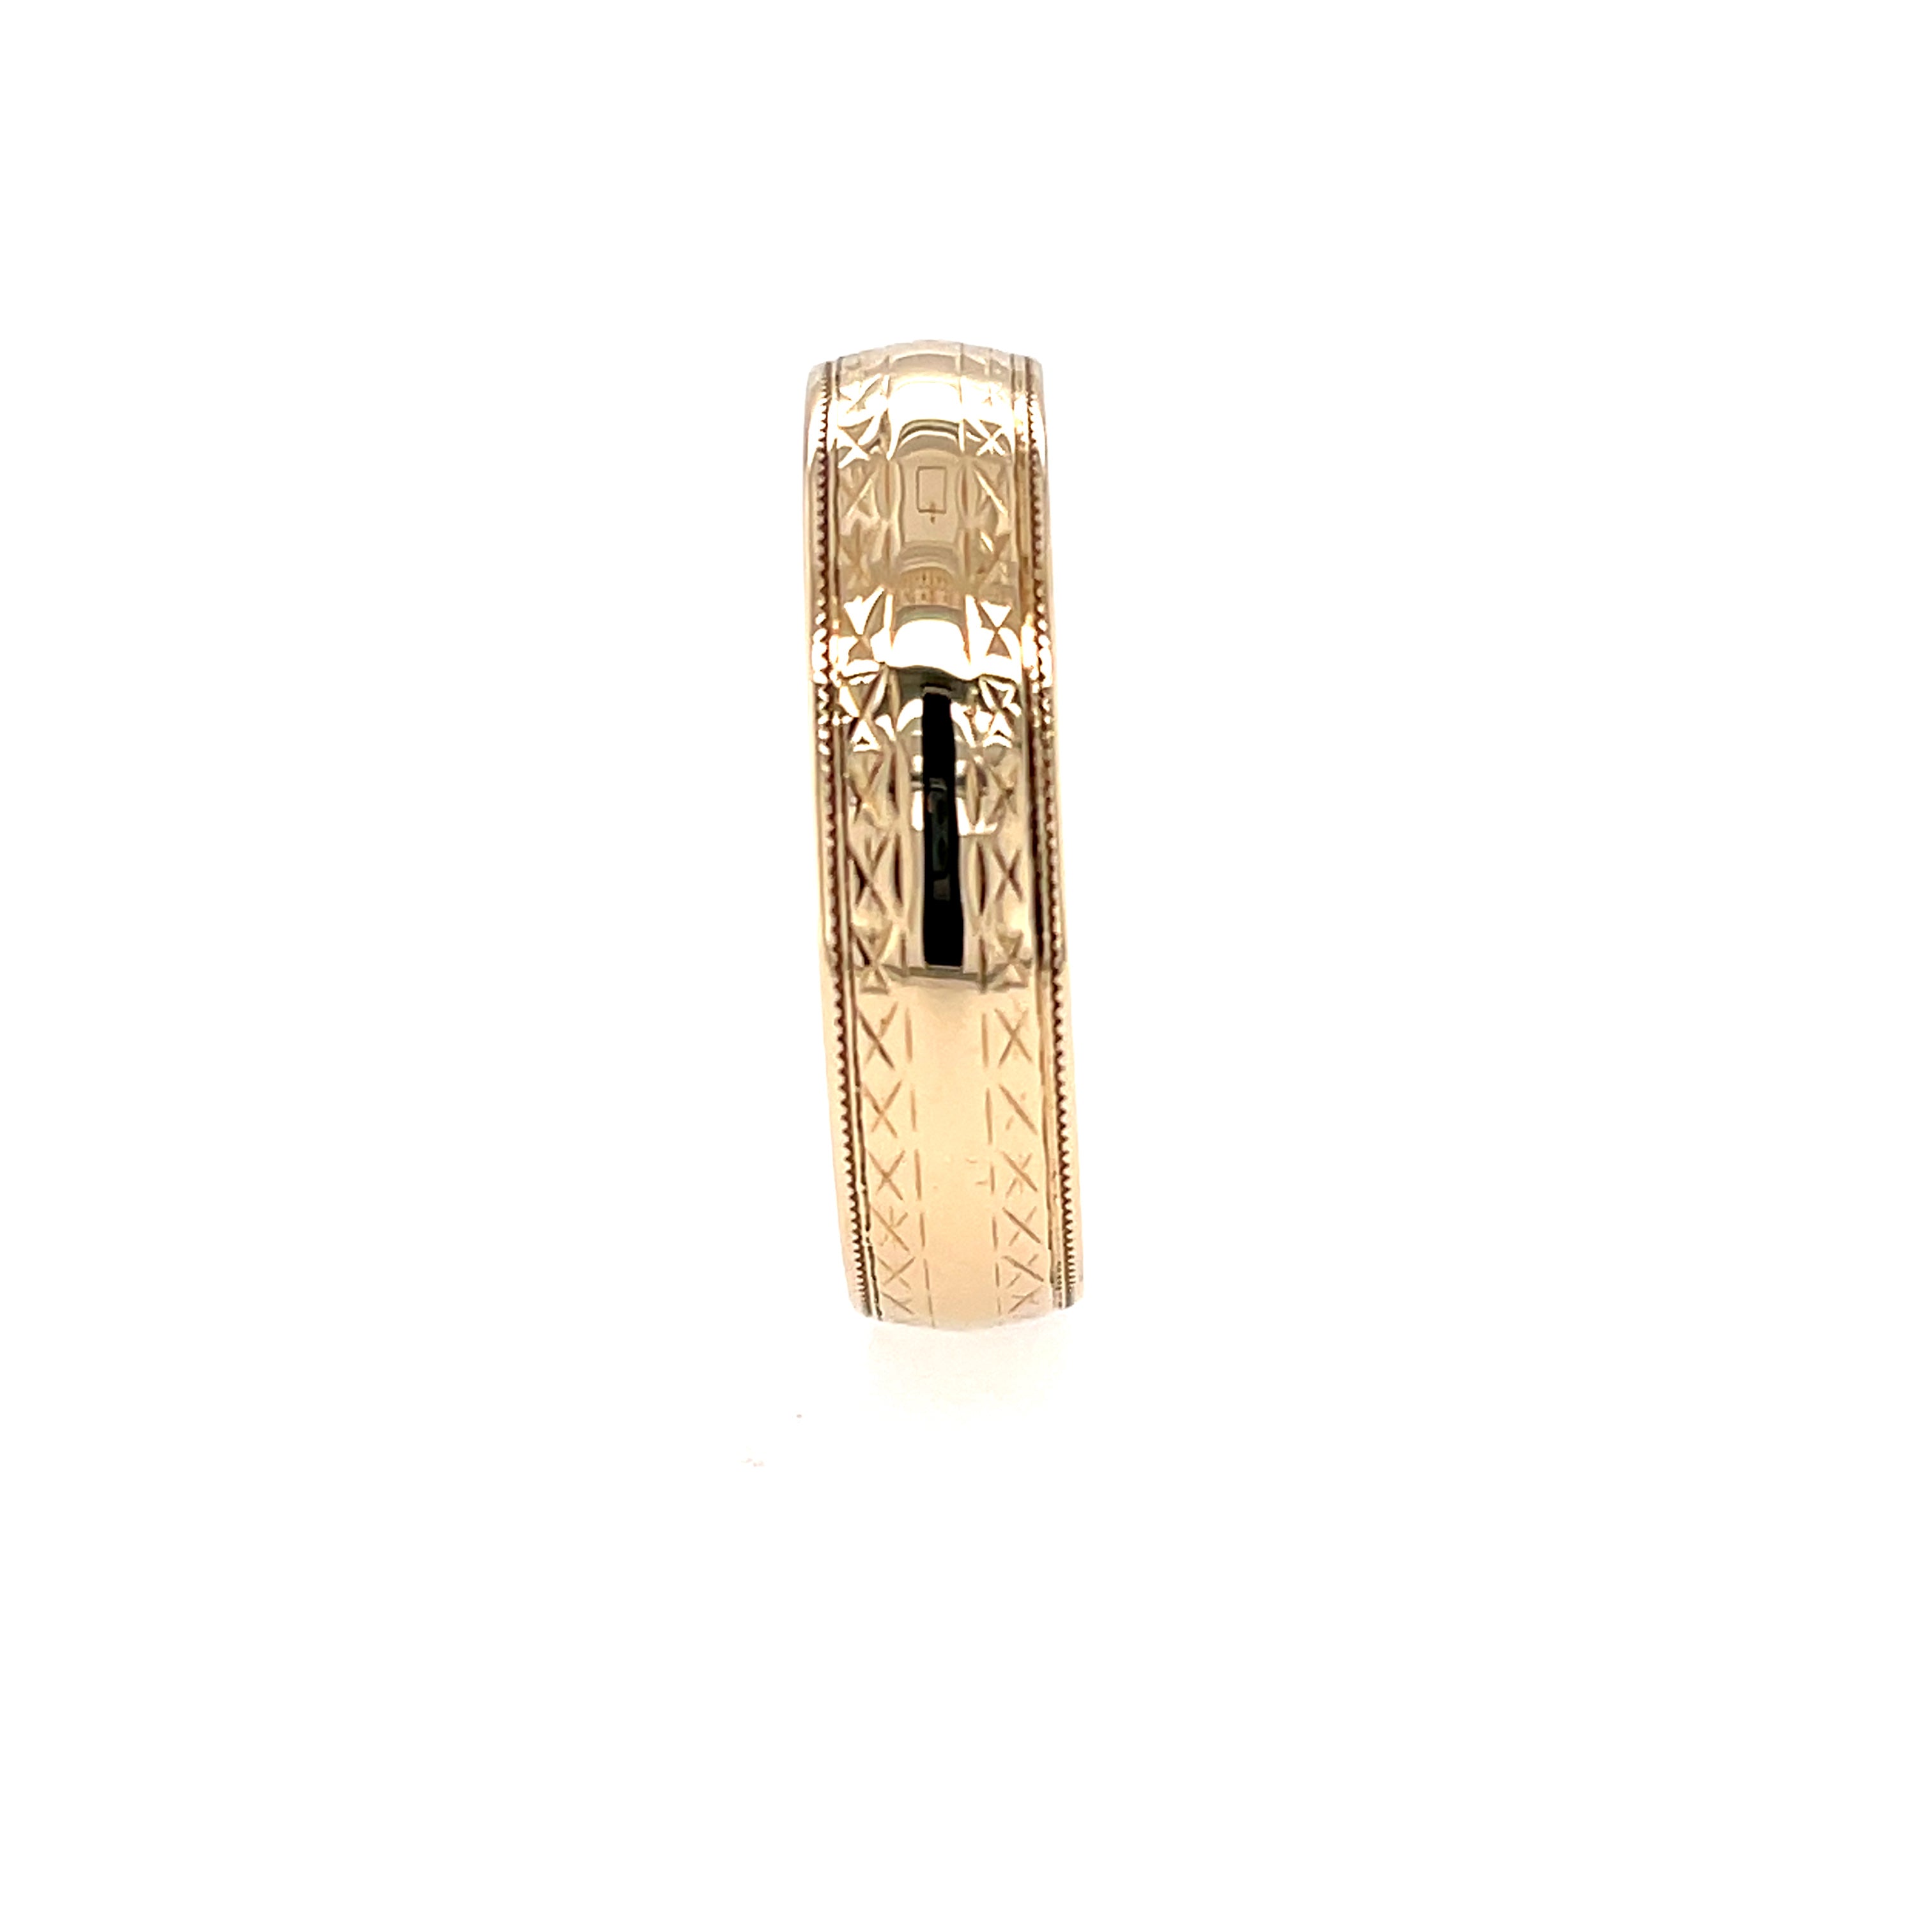 9ct Yellow Gold 5mm Patterned Wedding Band Ring - Size Z SOLD